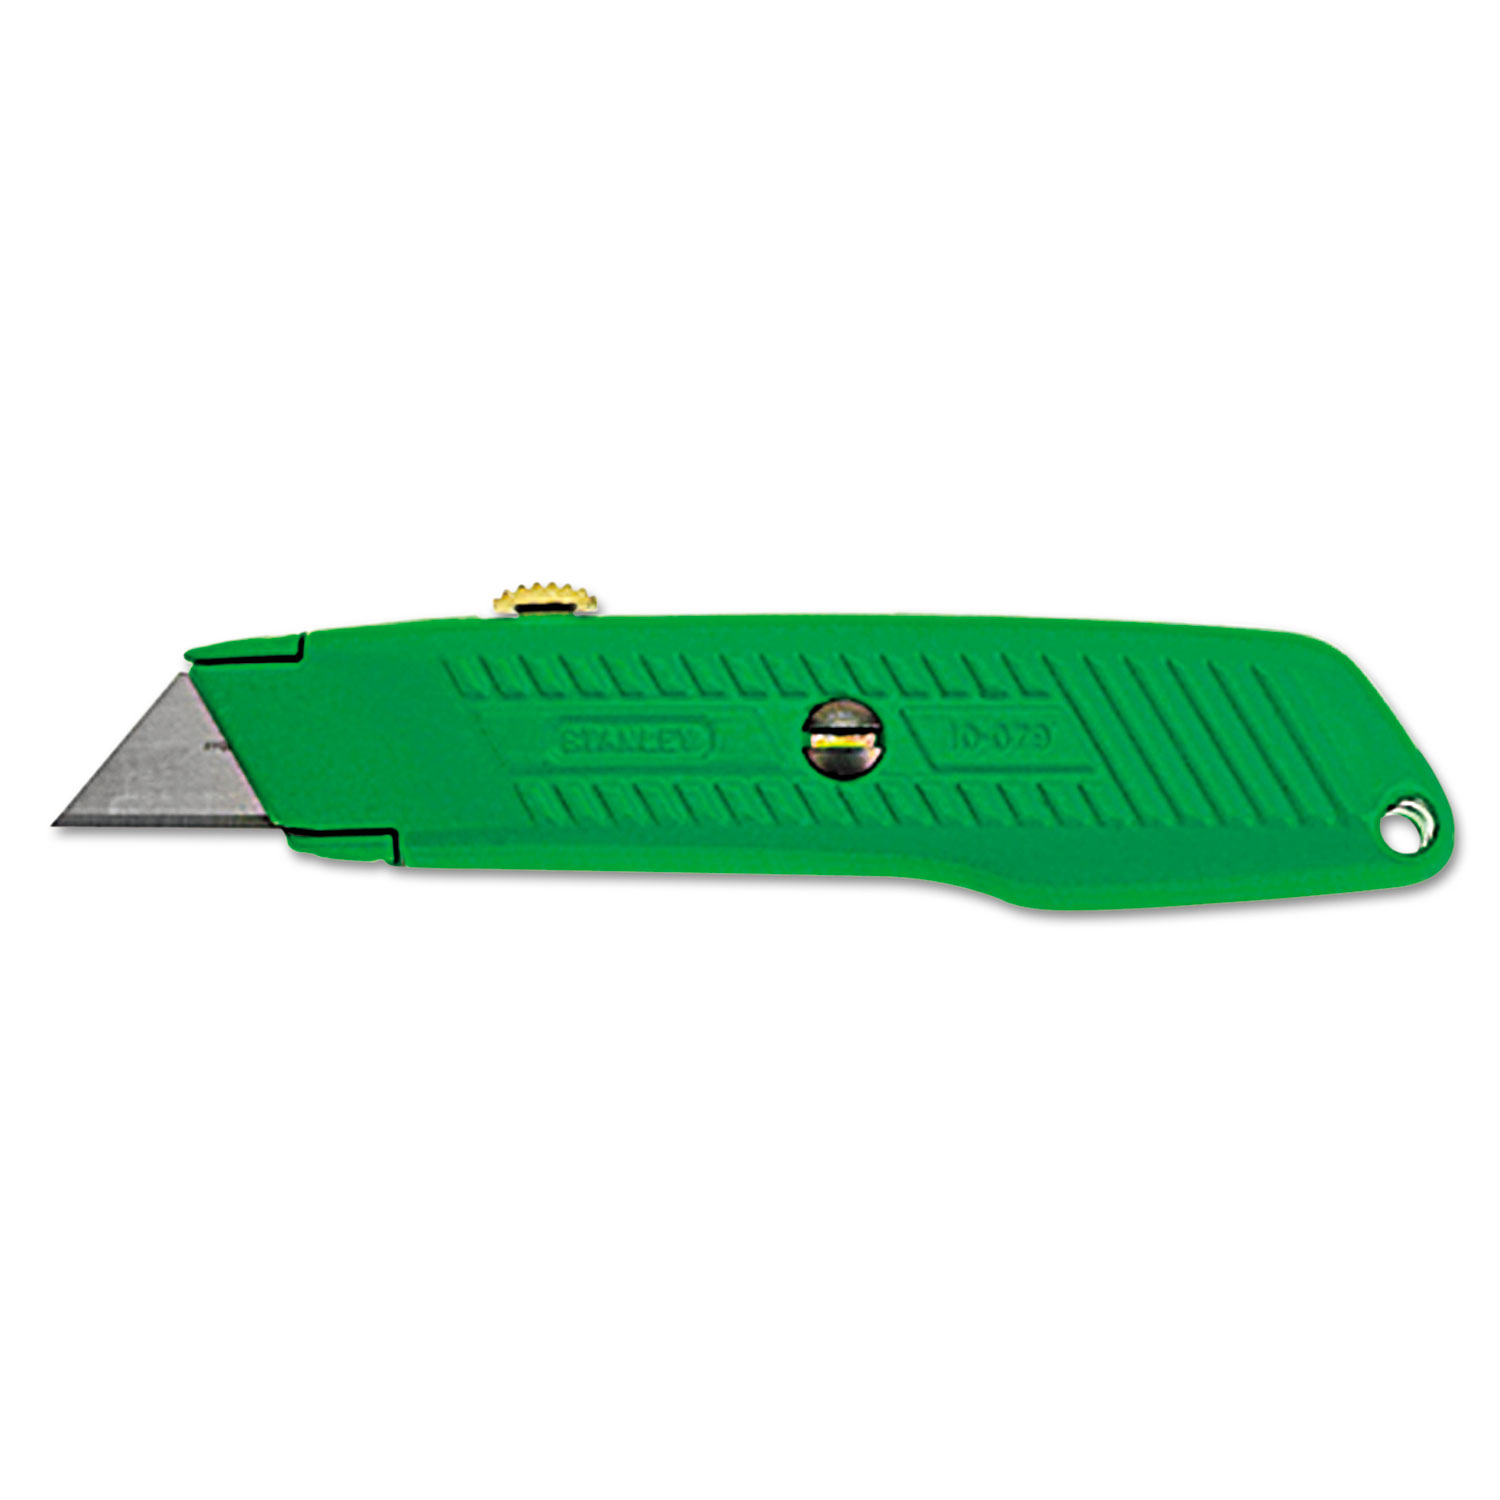 High Visibility Retractable Utility Knife, 5 7/8 in